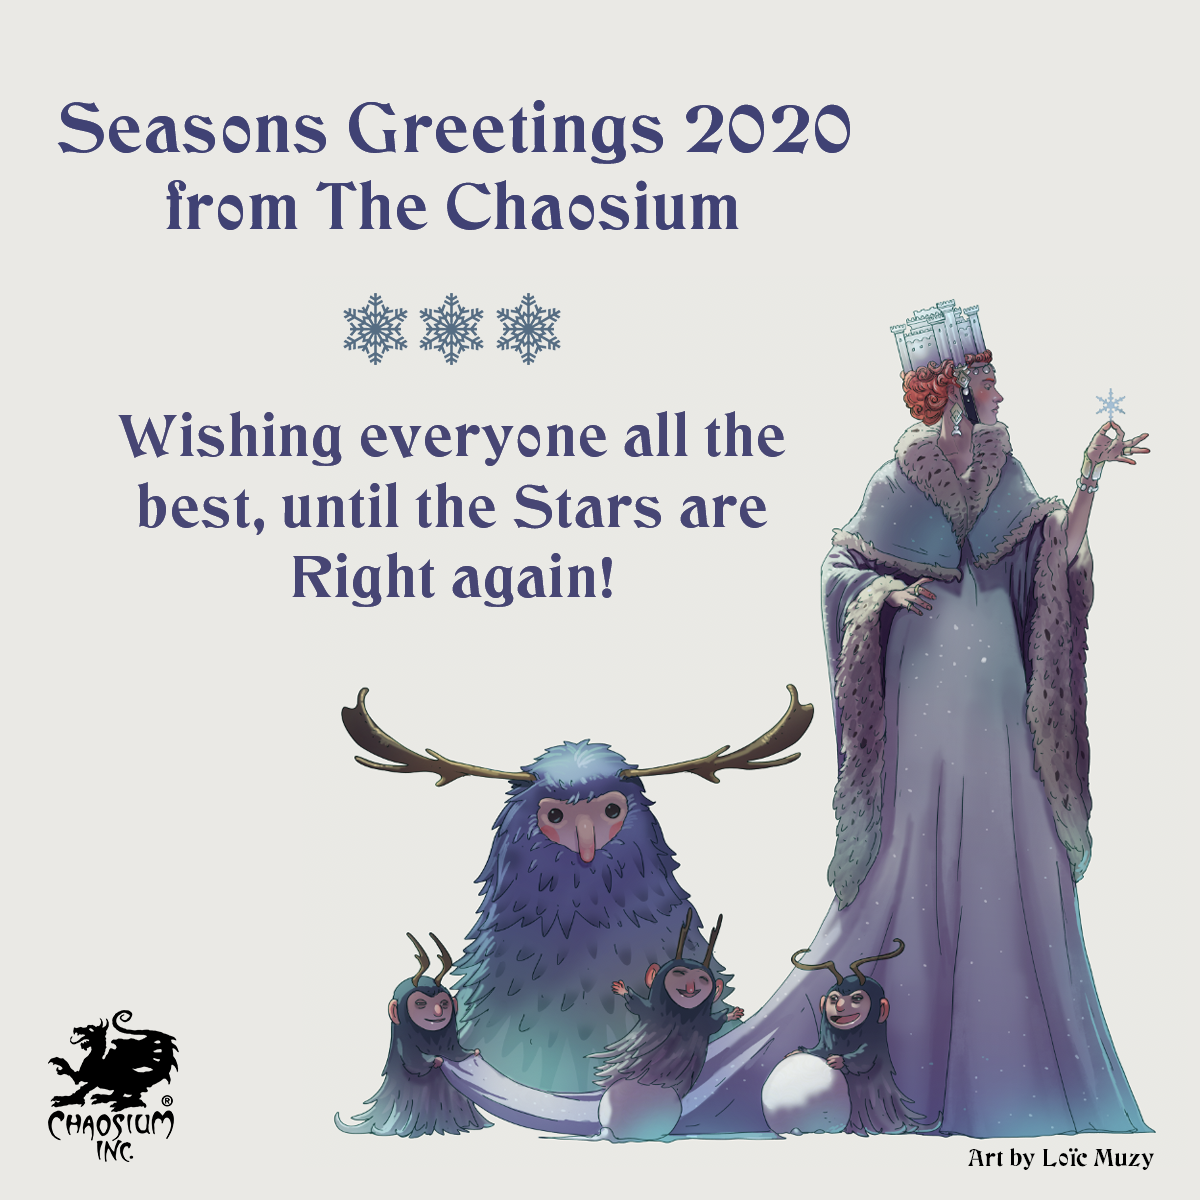 Seasons Greetings from The Chaosium 2020